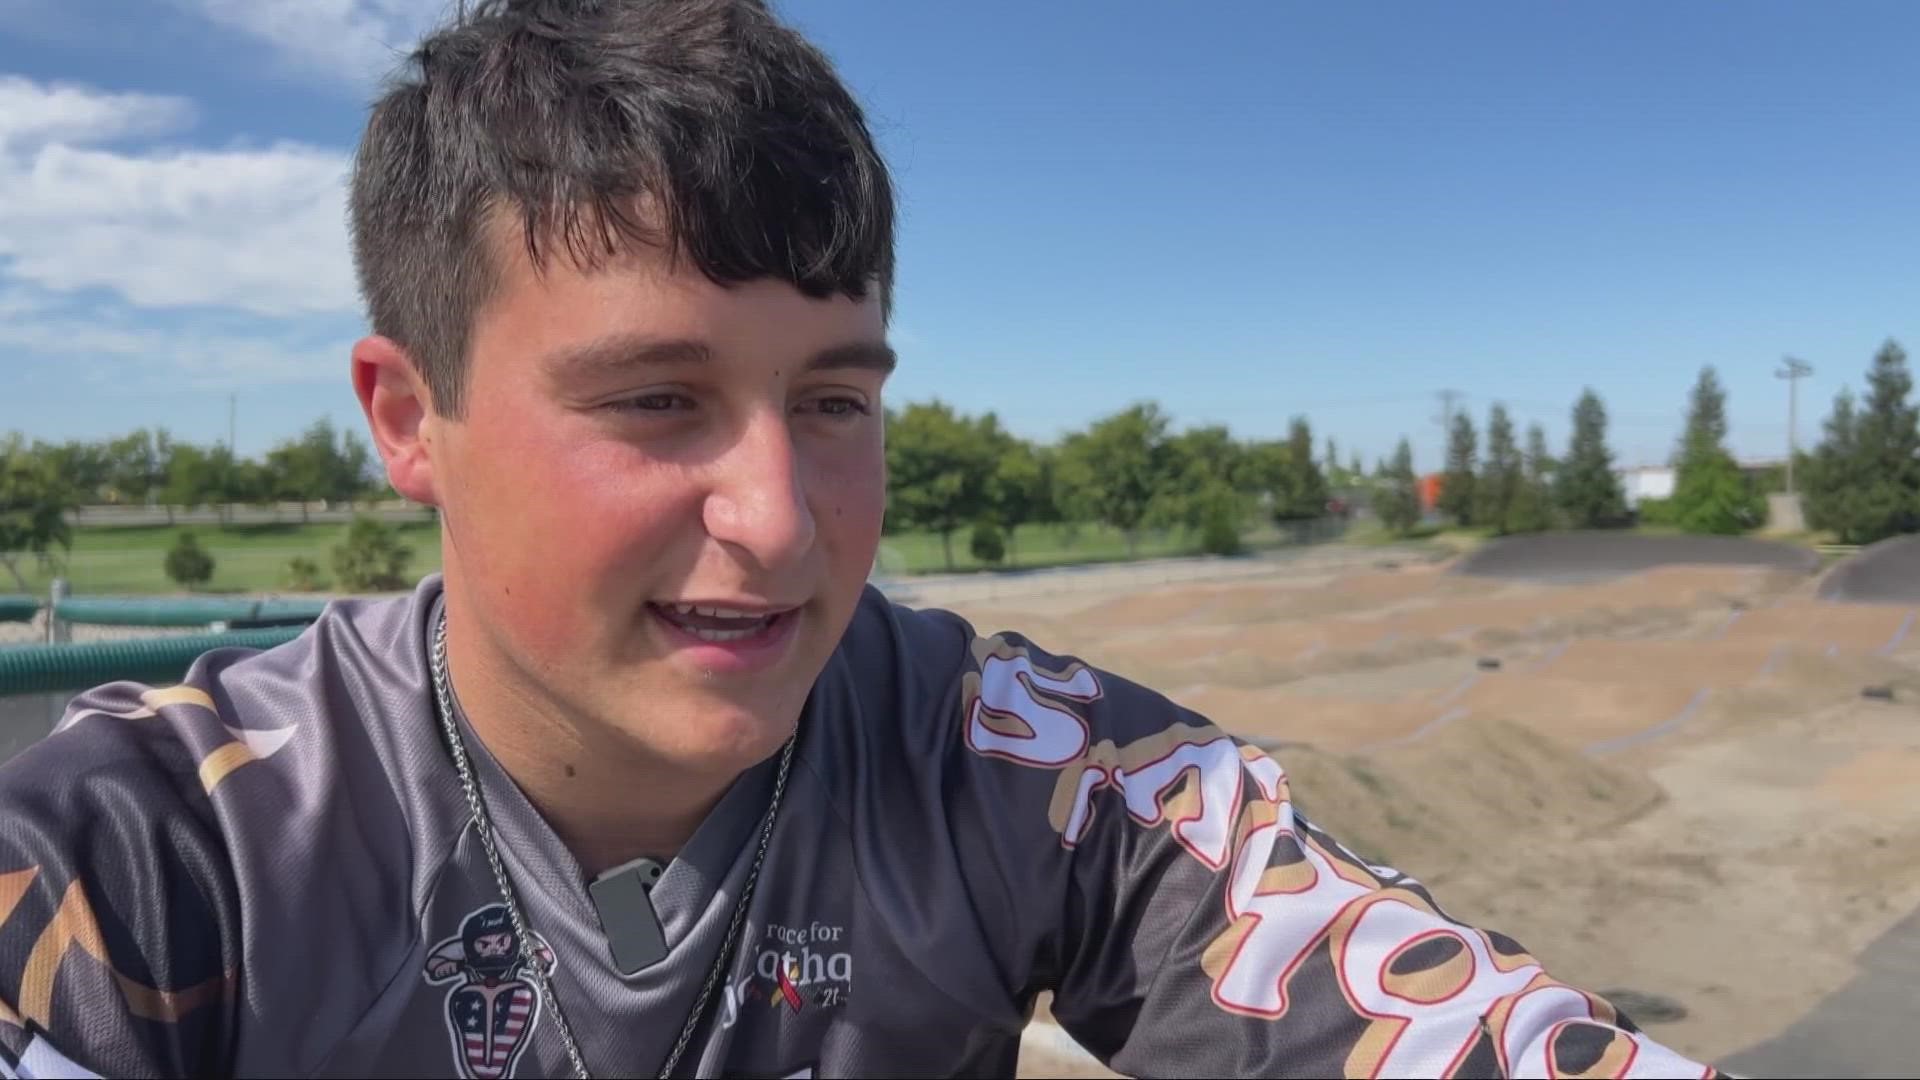 15-year-old Ricky Carter from Manteca was headed to the BMX world championships in 2020, but his opportunity to compete was canceled as a result of the pandemic.